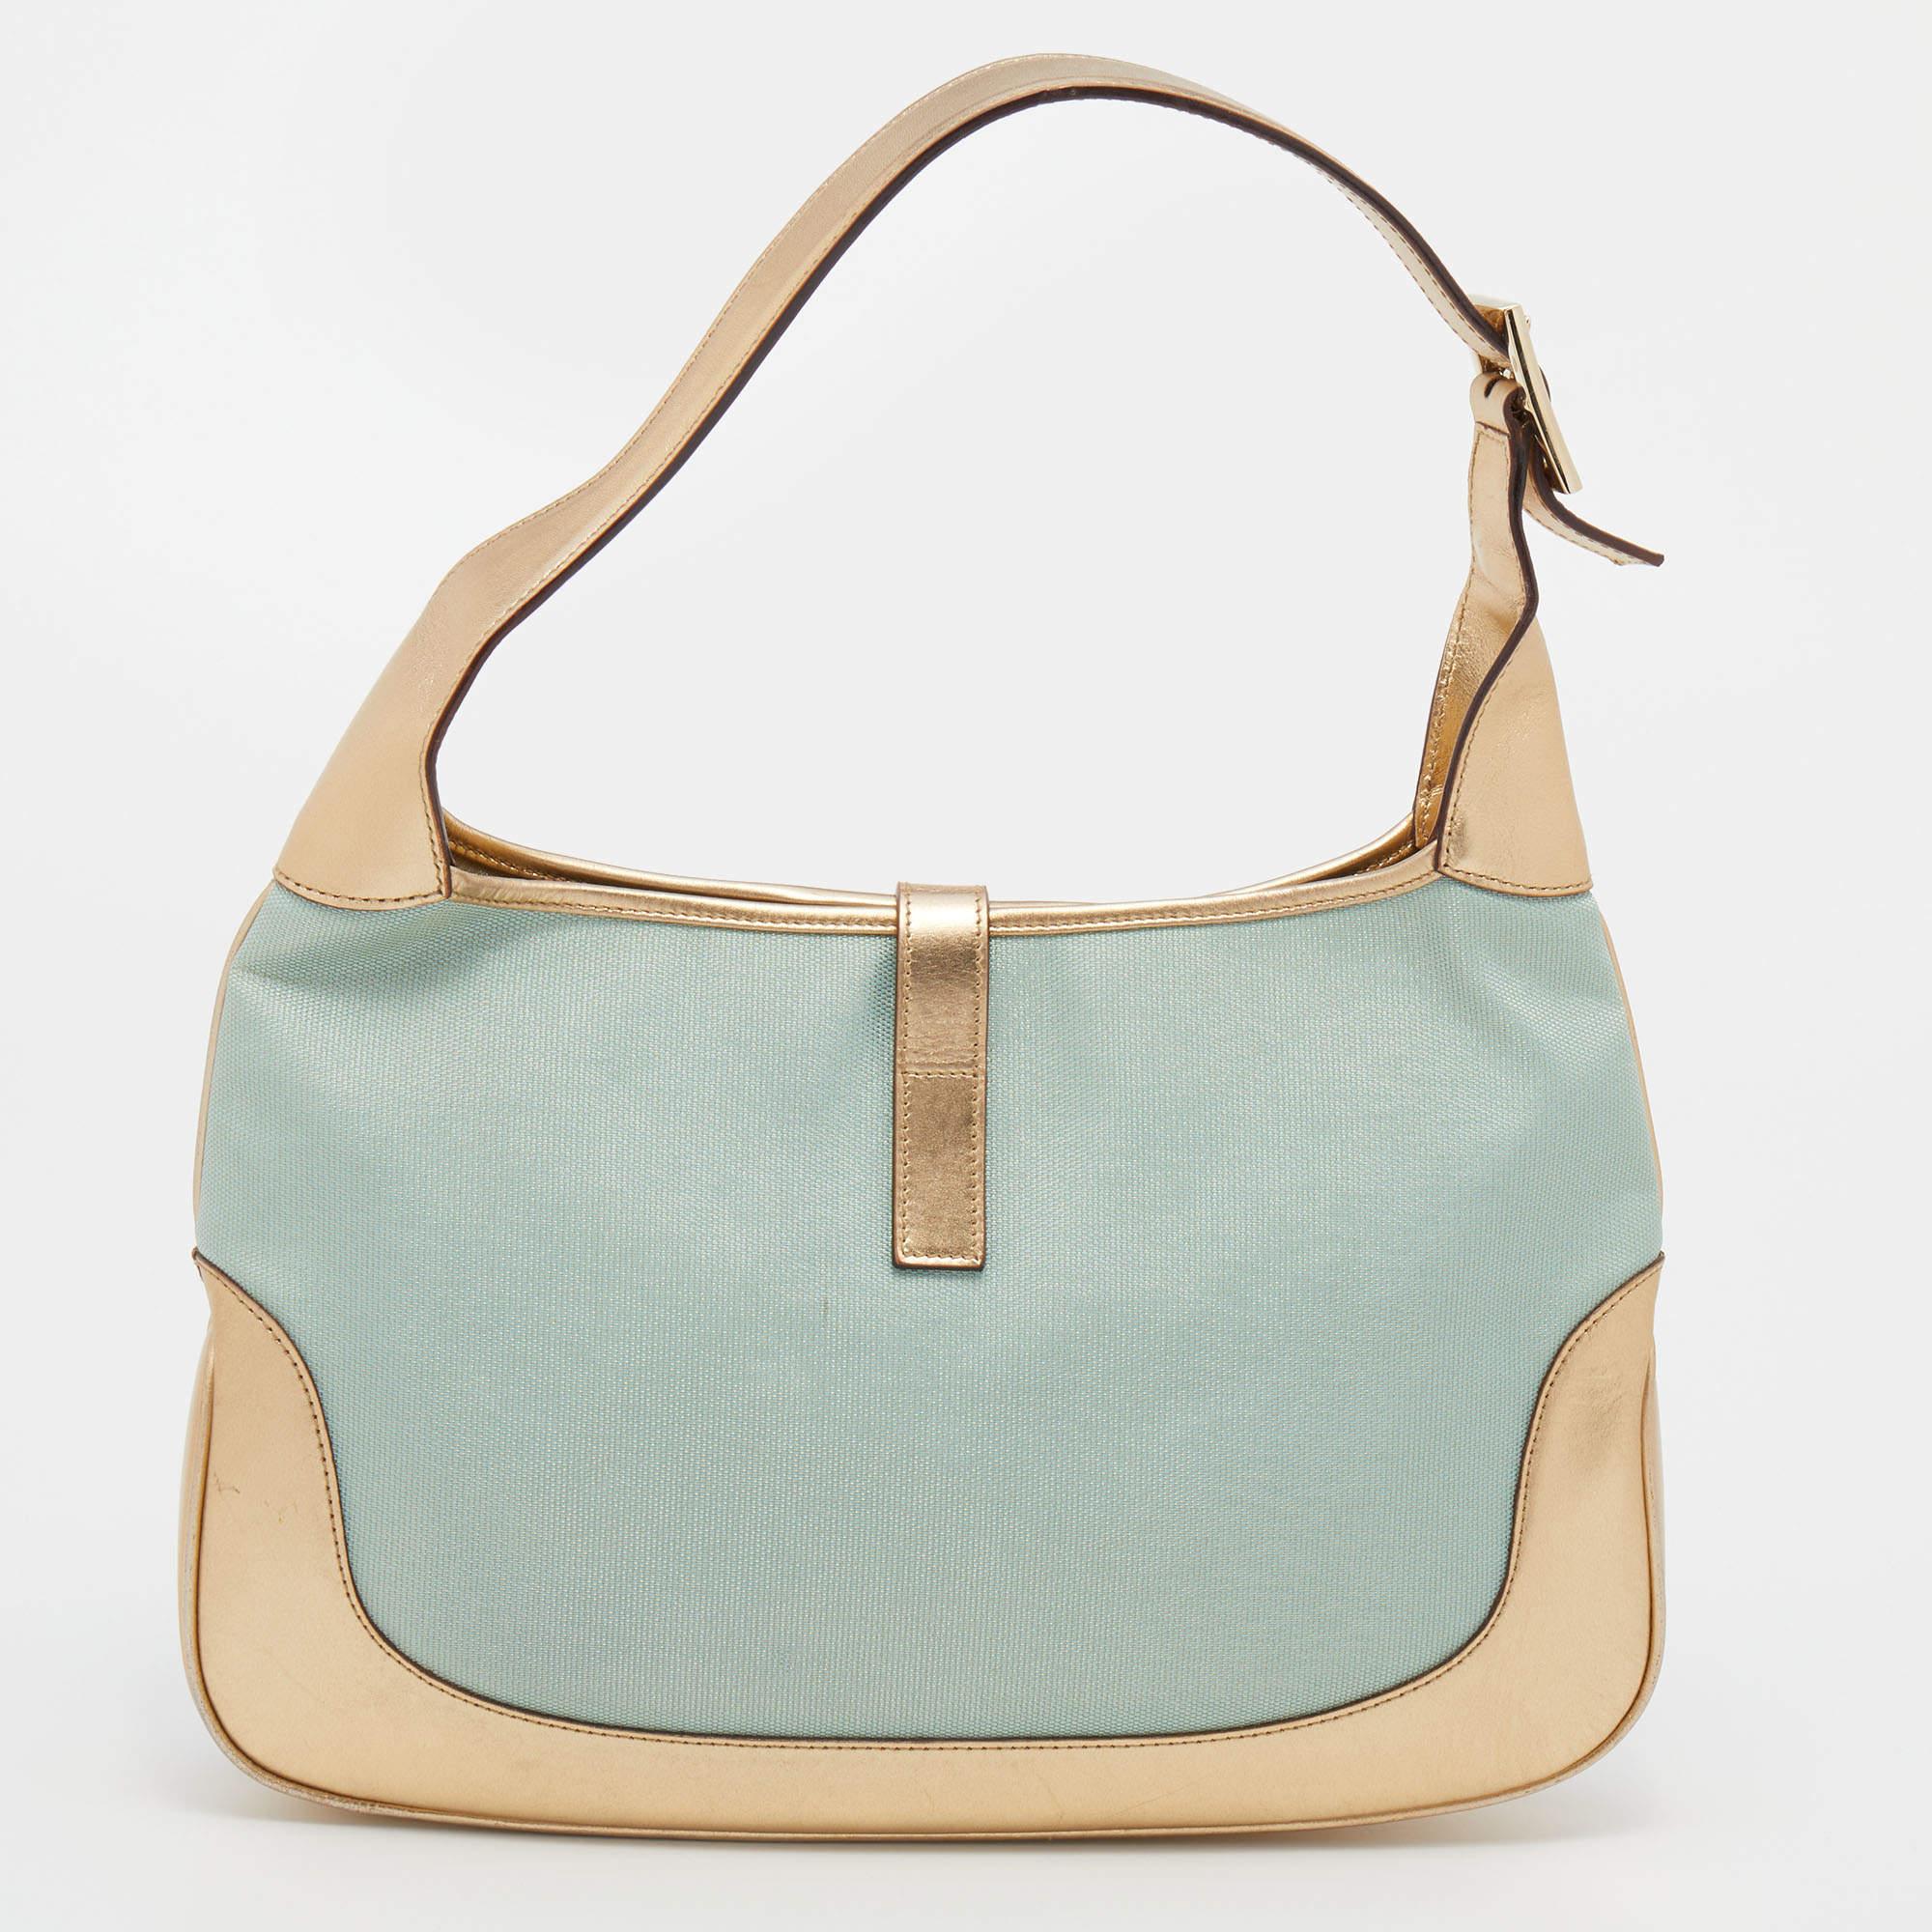 Gucci has always offered cult-favorite bags, just like this Jackie O hobo created as a homage to Jacqueline Kennedy Onassis. It is crafted from blue canvas and gold leather. A piston push-lock closure opens to a roomy interior that offers plenty of